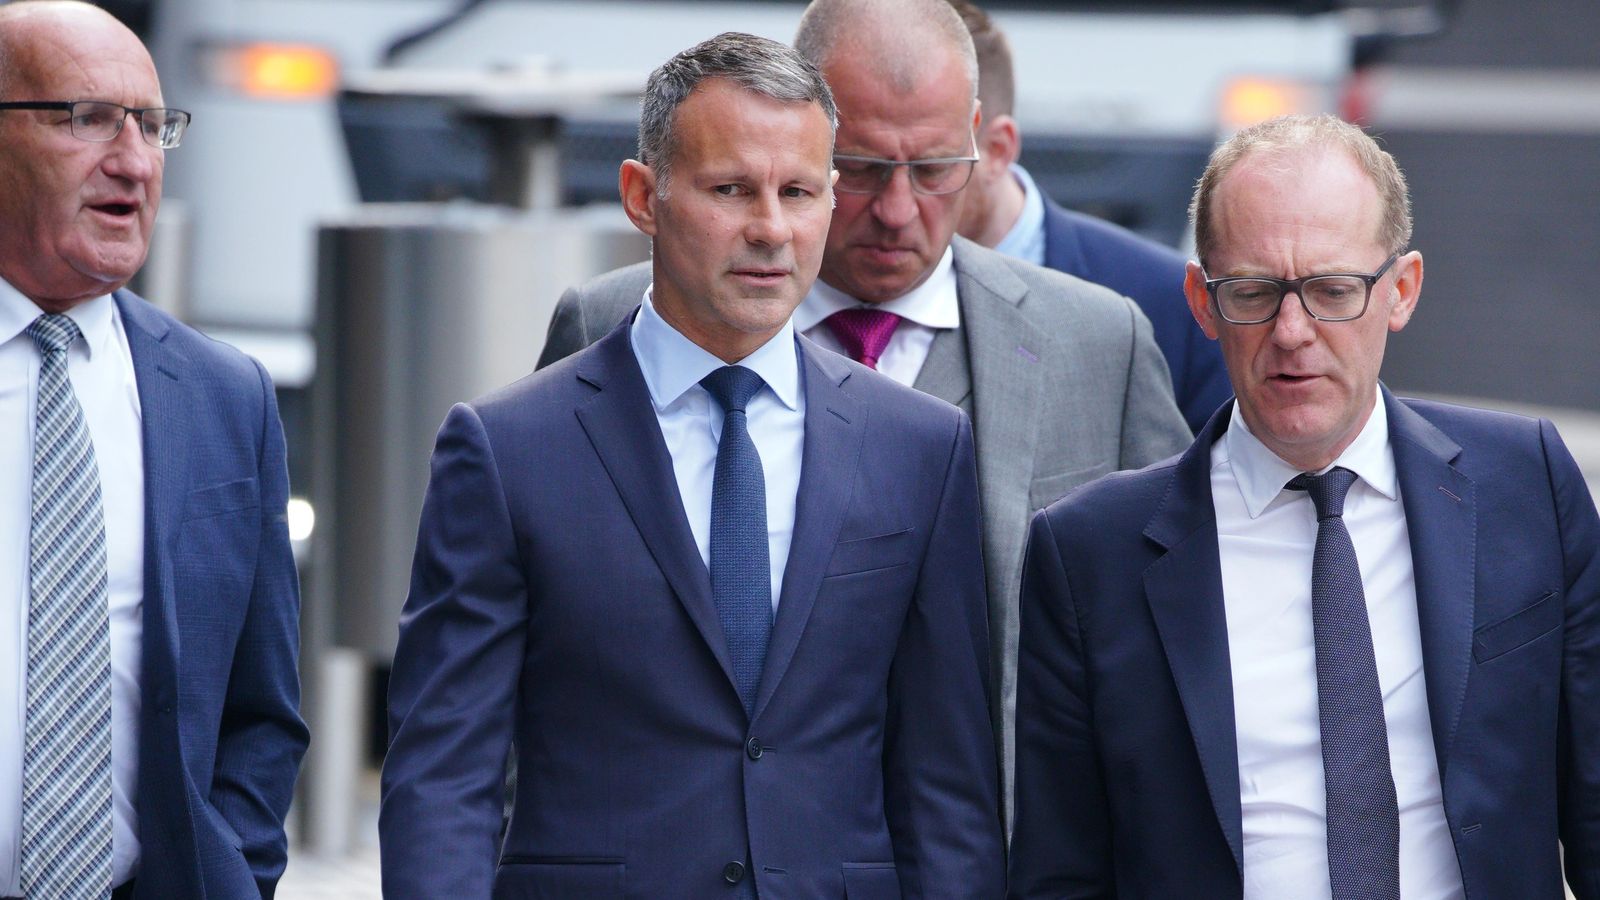 Ryan Giggs trial live: New witnesses to give evidence against Giggs after 999 calls played to court